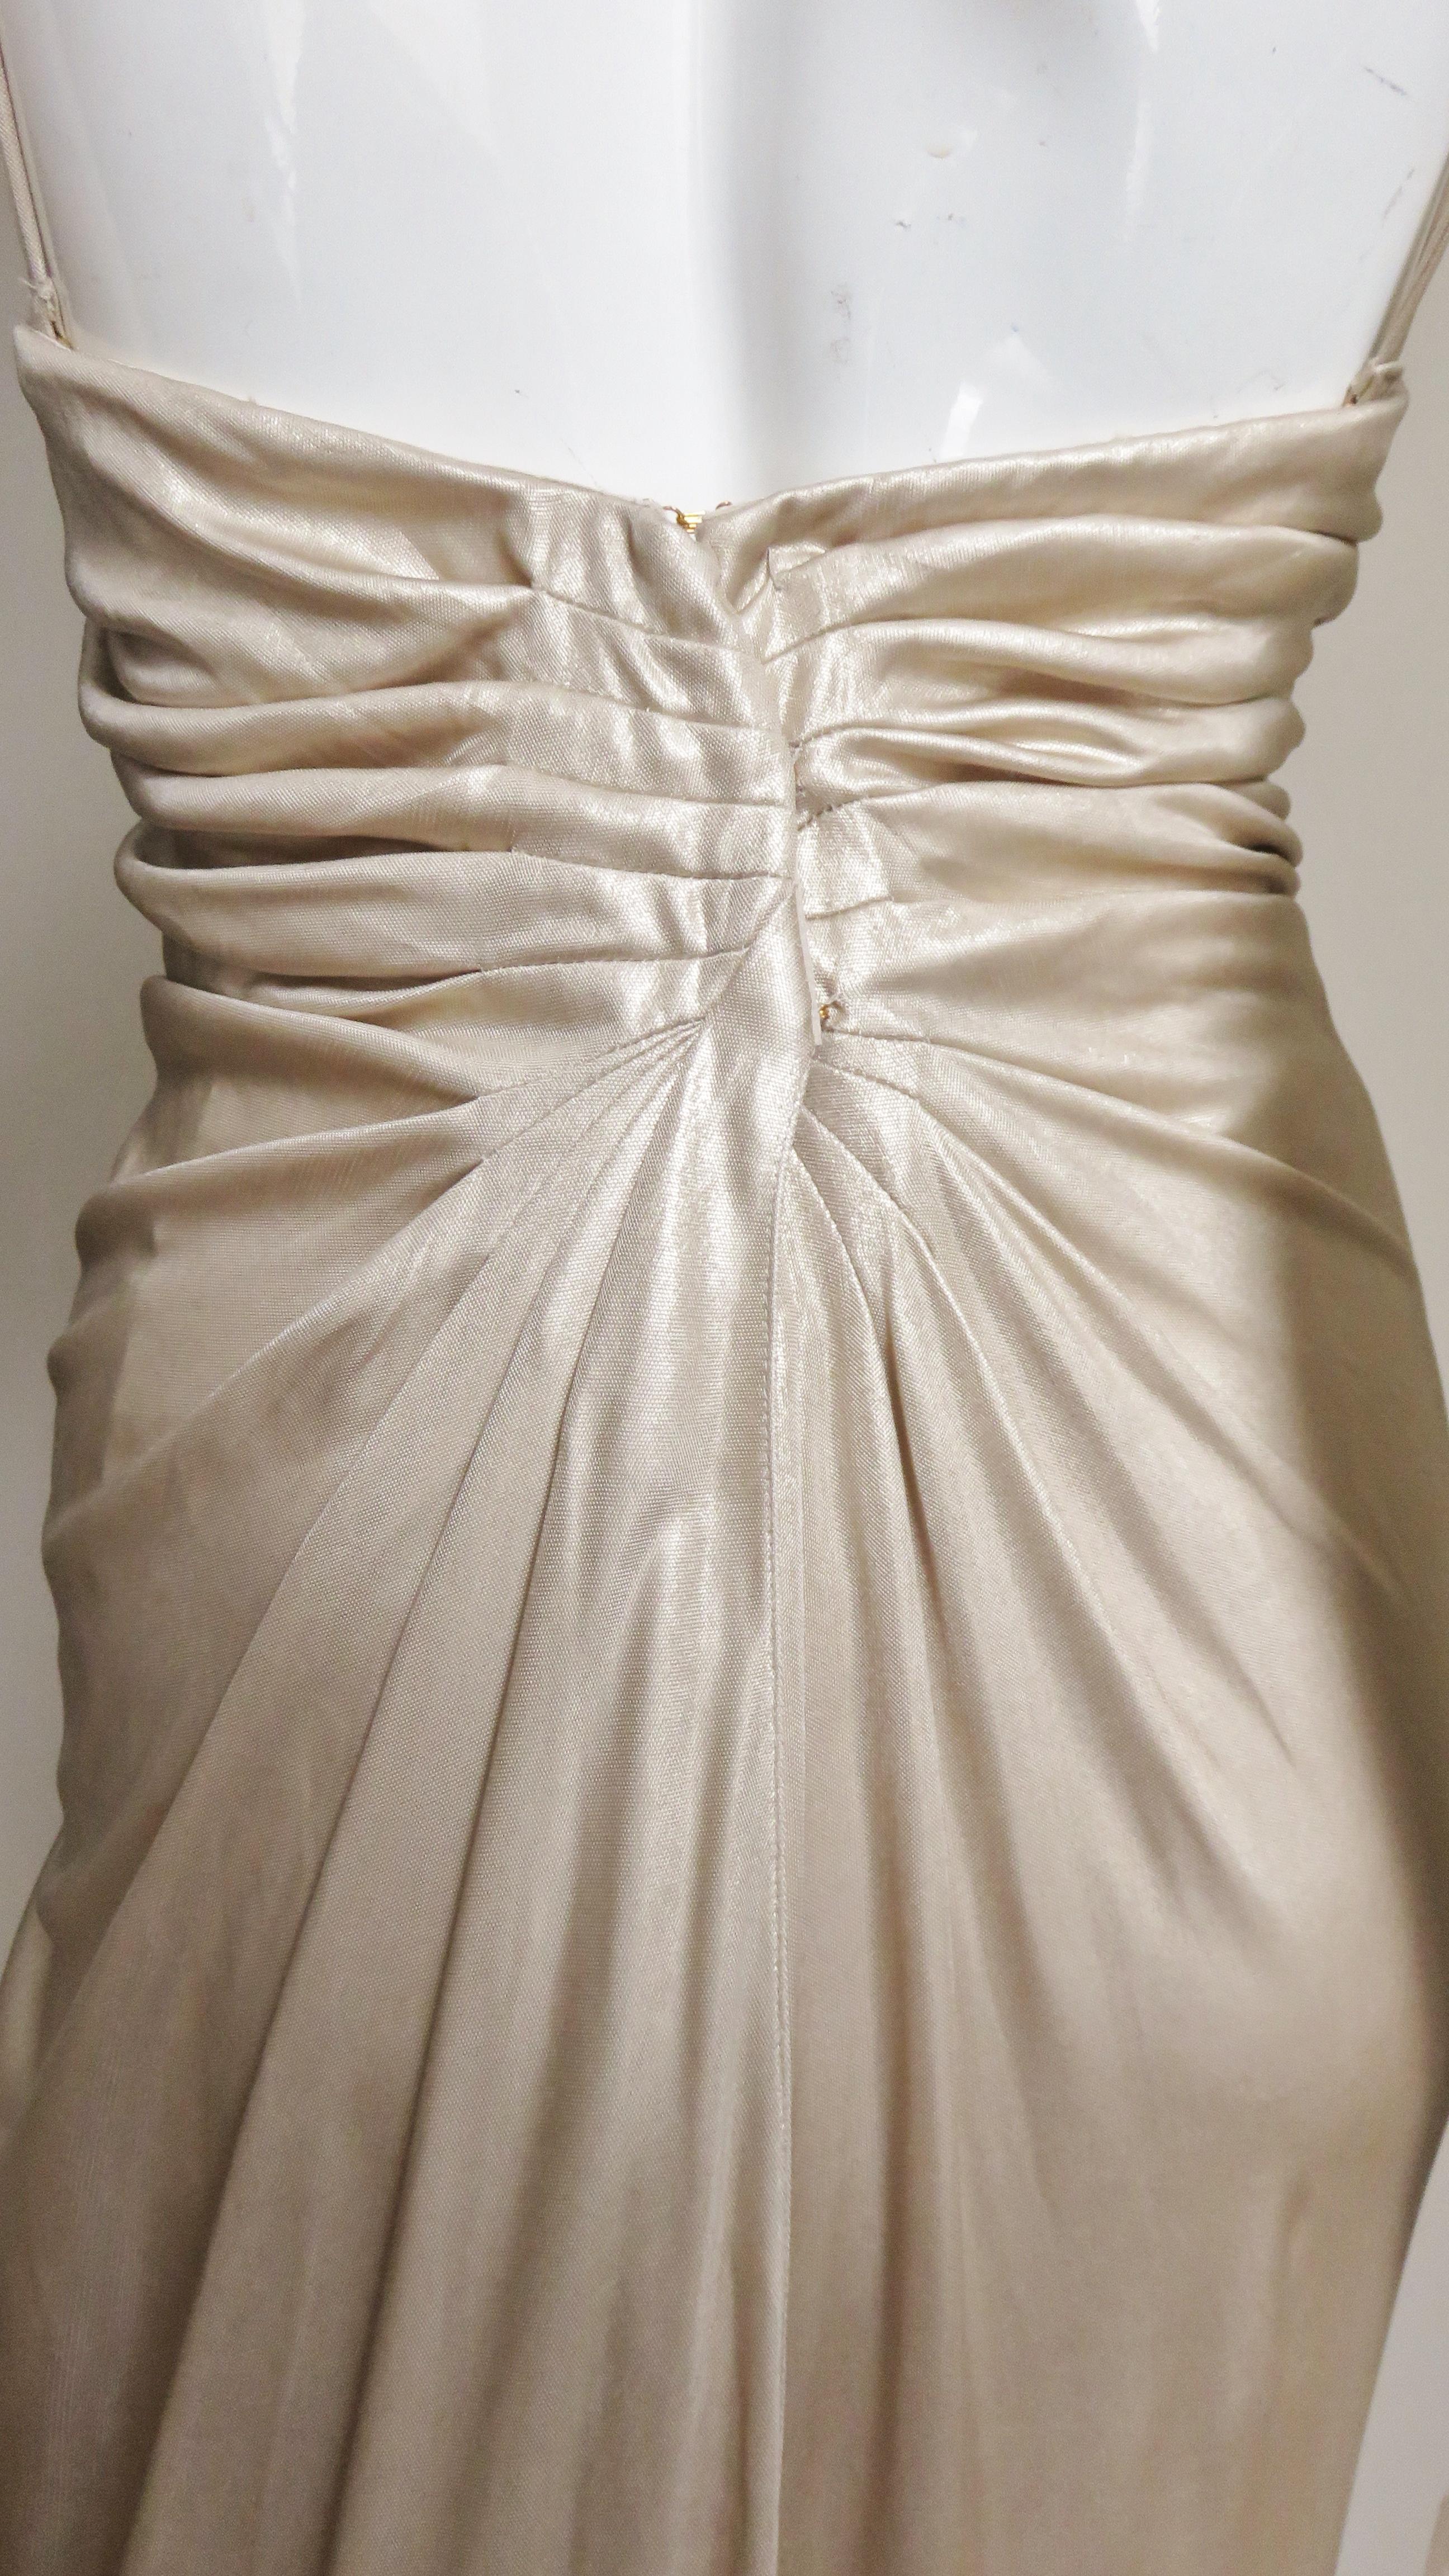 John Galliano for Christian Dior Ruched Corset Bustier Dress  For Sale 4